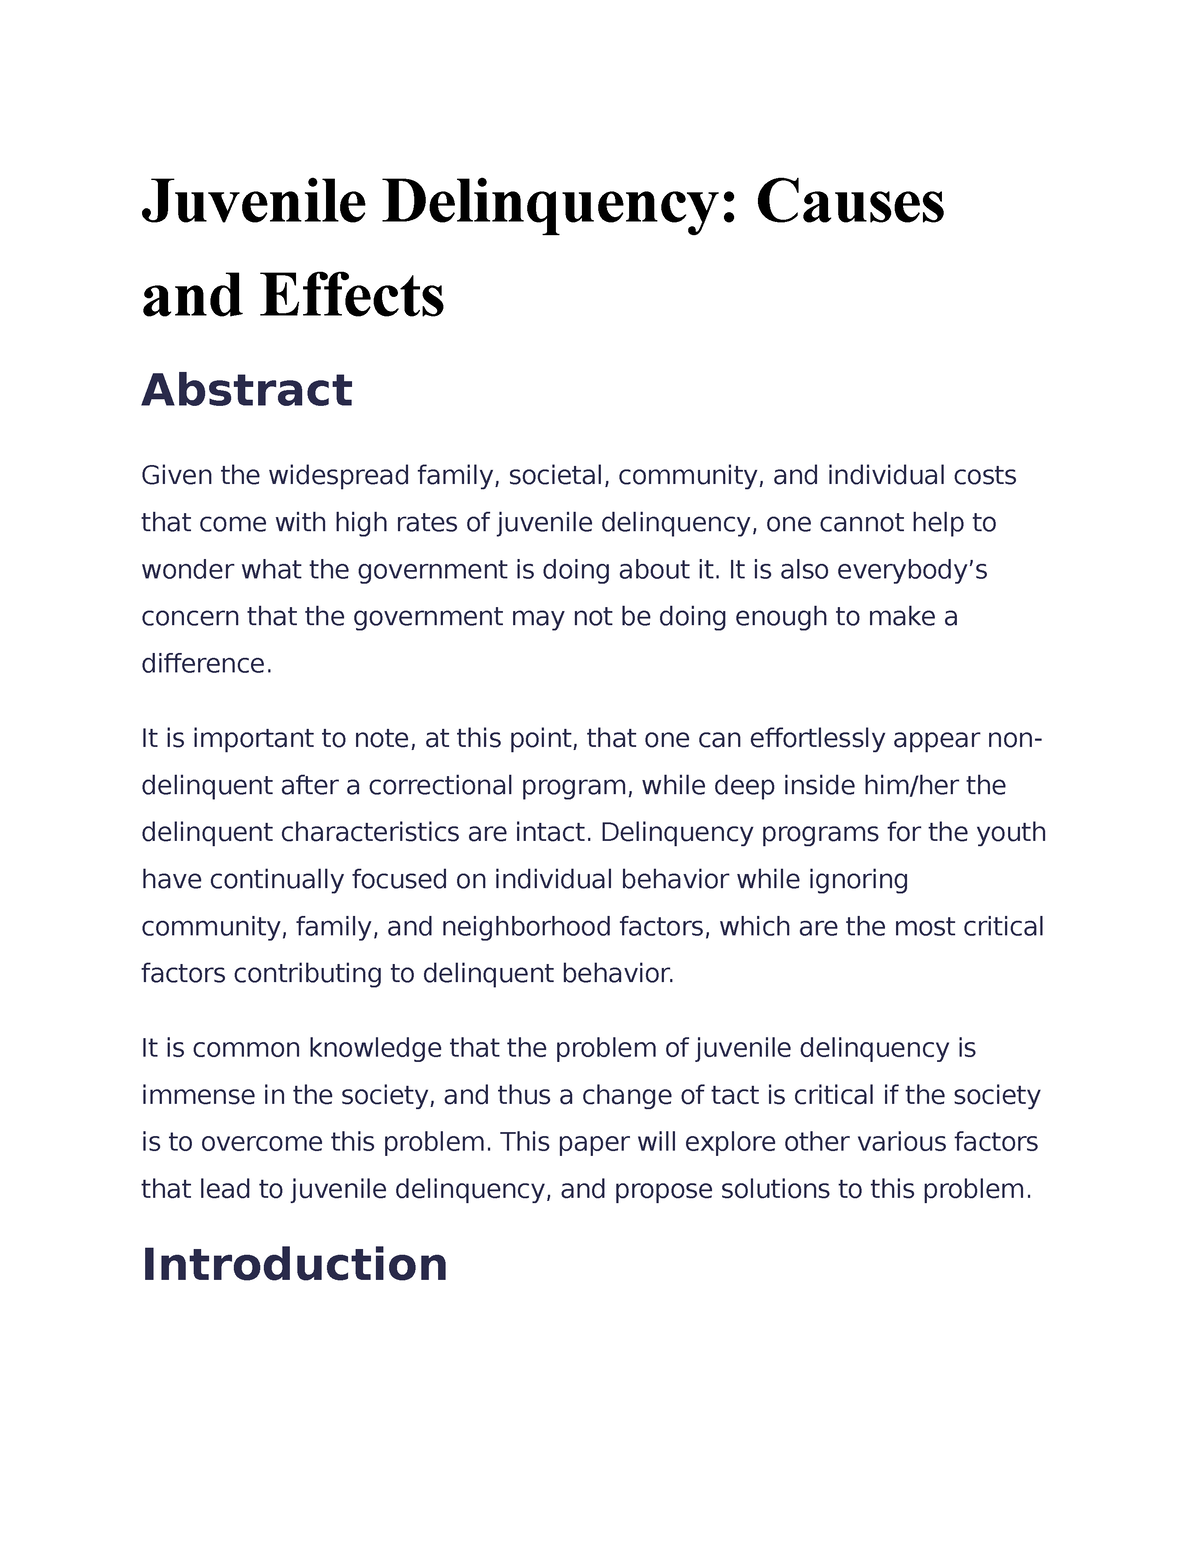 thesis about juvenile delinquency